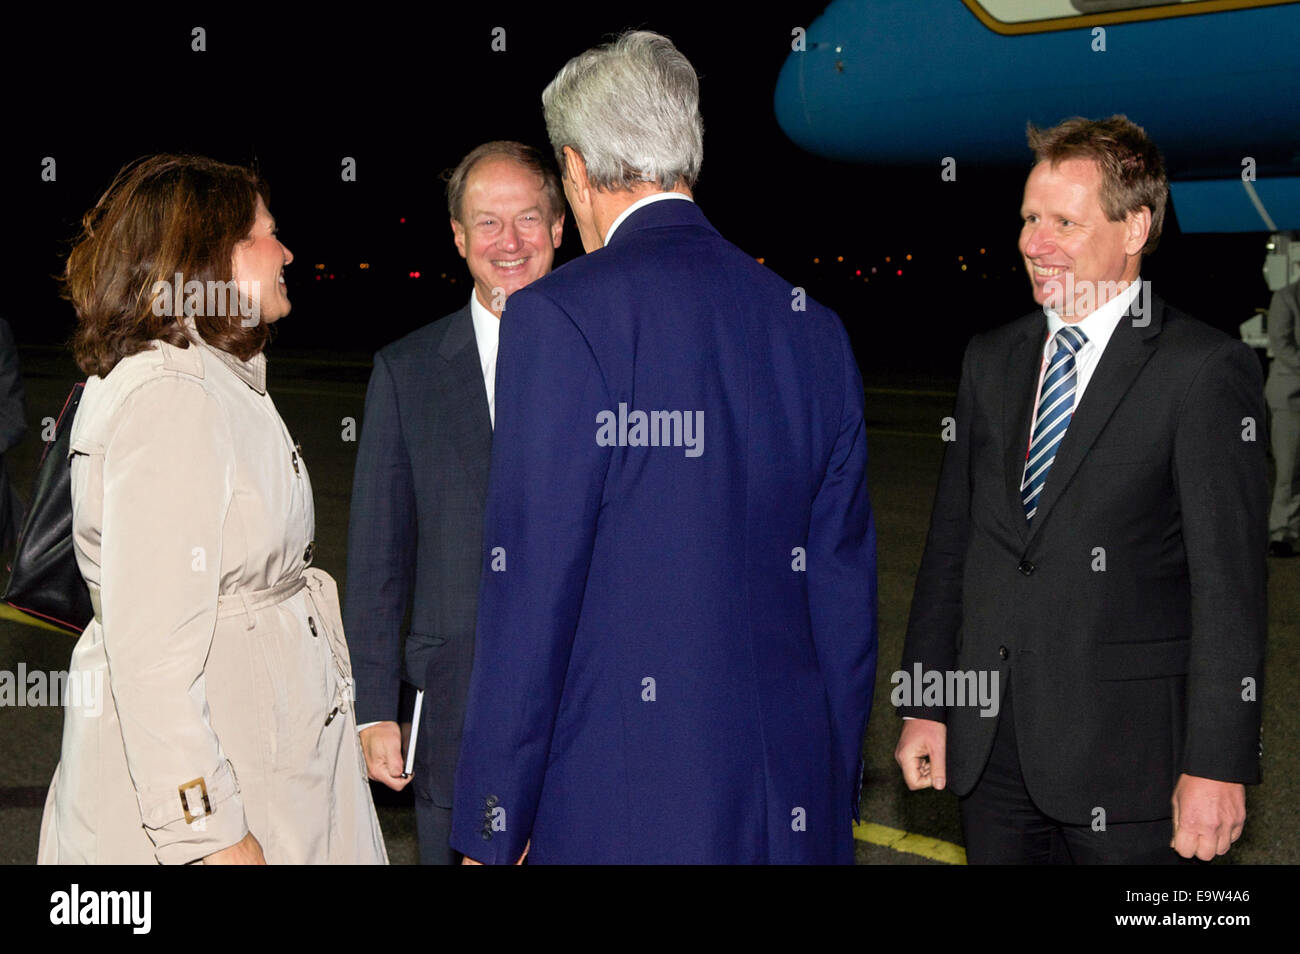 U.S. Secretary of State John Kerry chats with Deputy Assistant Secretary for European and Eurasian Affairs Julieta Vall Noyes, U.S. Ambassador to Germany John Emerson, and Peter Sauer, head of the German Foreign Office Protocol Office, after arriving in B Stock Photo